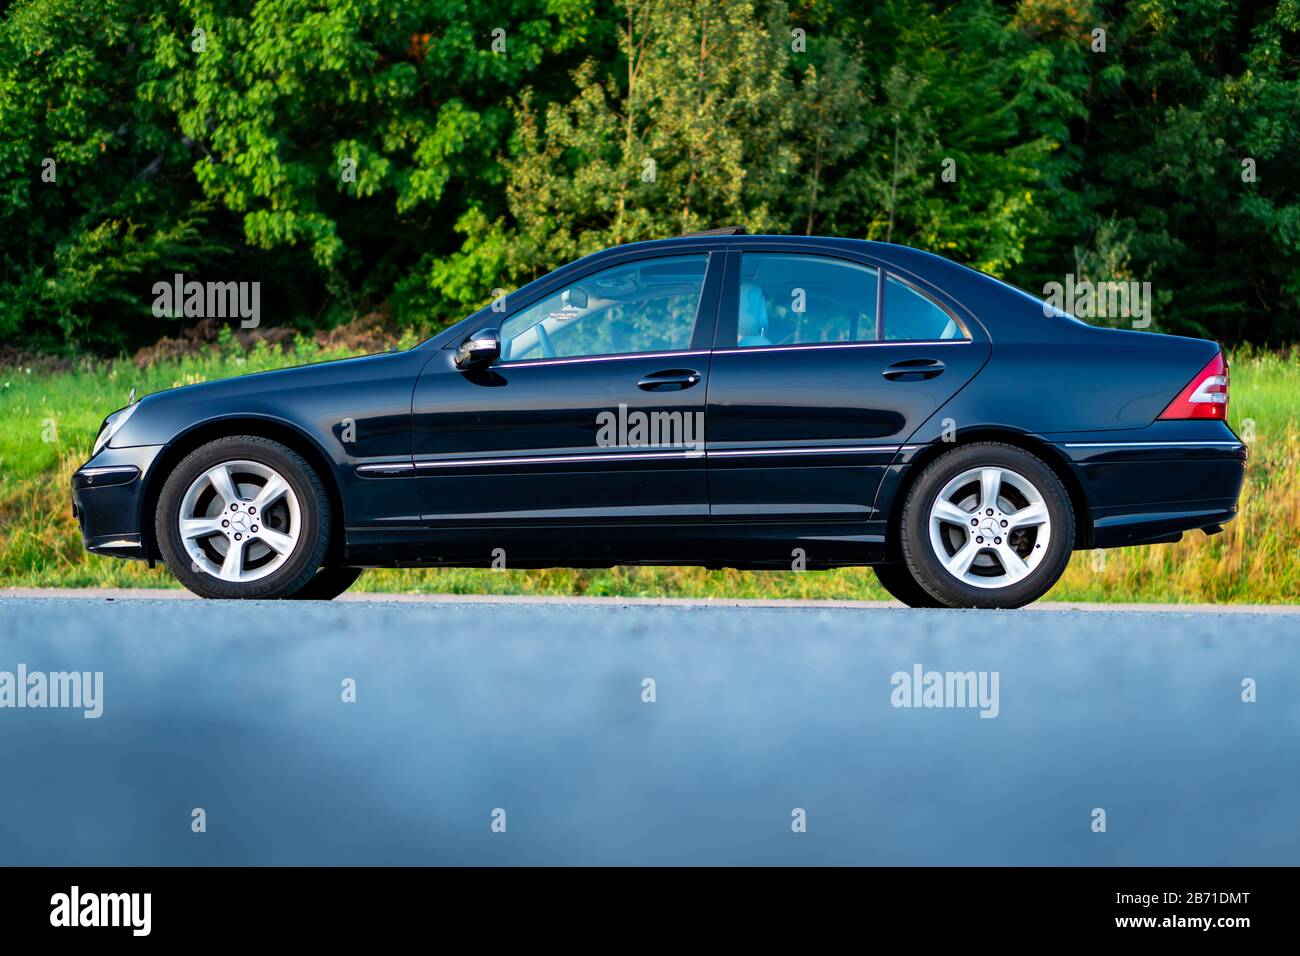 Mercedes Benz W204, year 2008, Avantgarde trim, isolated in an empty  parking lot -winter photo session Stock Photo - Alamy